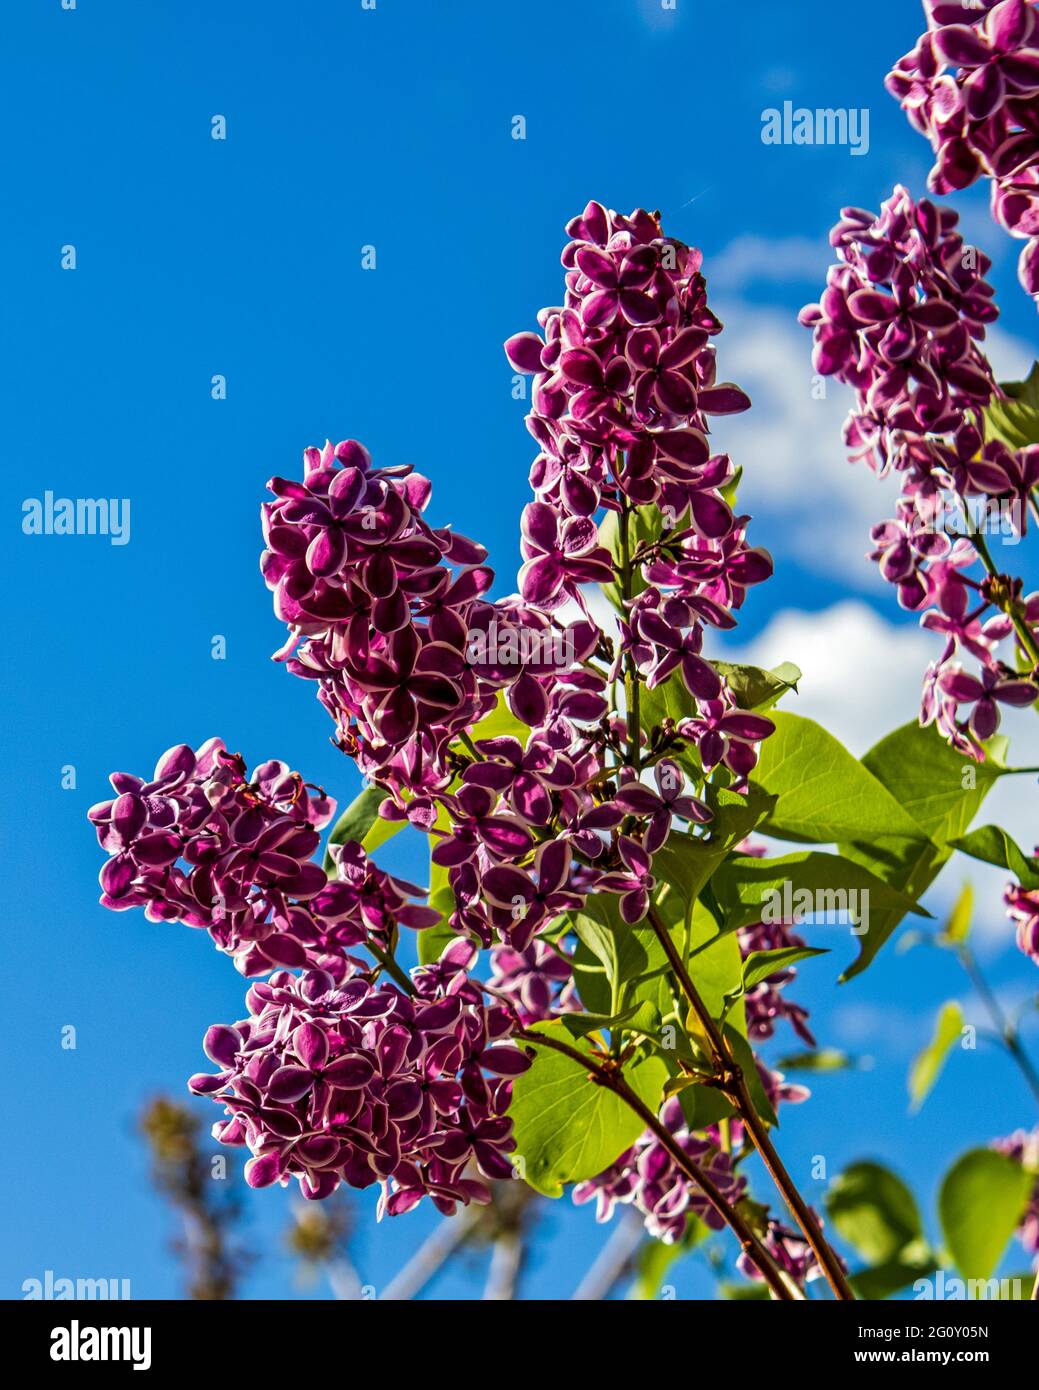 Purple lilac blossoms with green leaves and blue skies Stock Photo